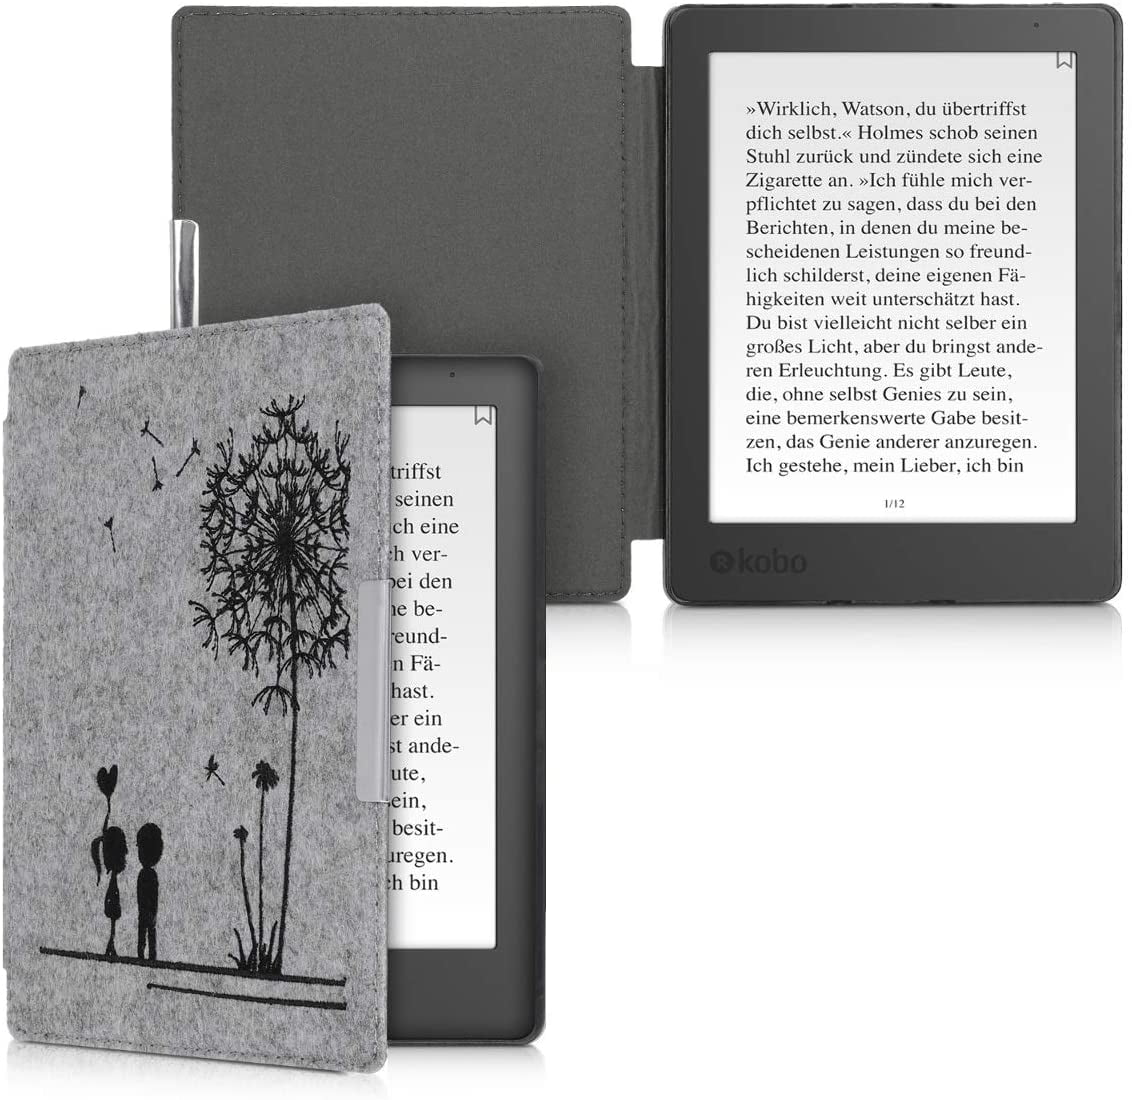 Fabric Dark Grey kwmobile Cover for Kobo Aura H2O Edition 2 Fabric e-Reader Case with Built-In Hand Strap and Stand